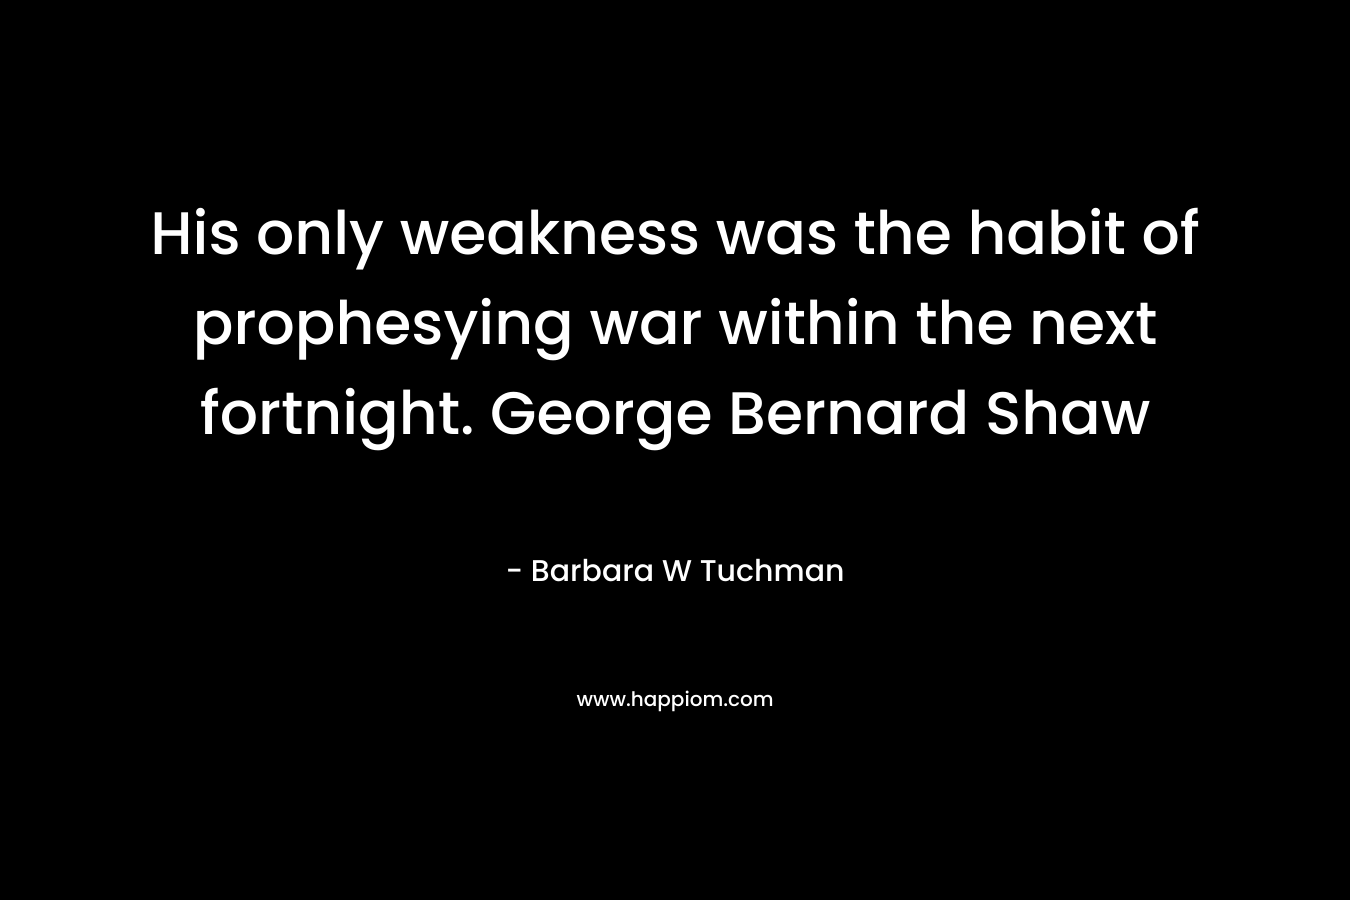 His only weakness was the habit of prophesying war within the next fortnight. George Bernard Shaw